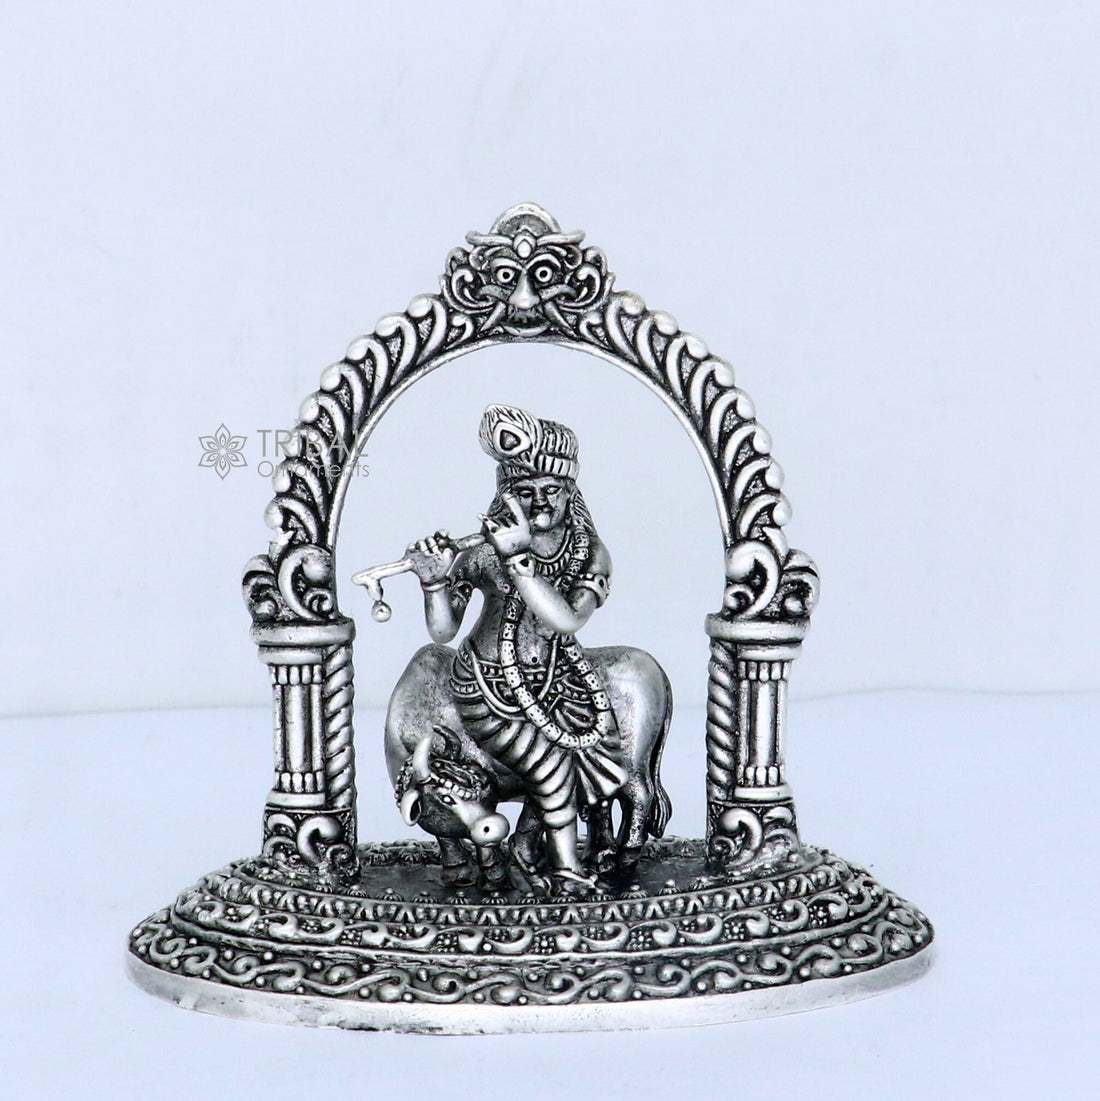 925 sterling silver Exclusive divine Hindu idol Krishna with cow Pendant, amazing design stunning figurine gifting puja articles art701 - TRIBAL ORNAMENTS